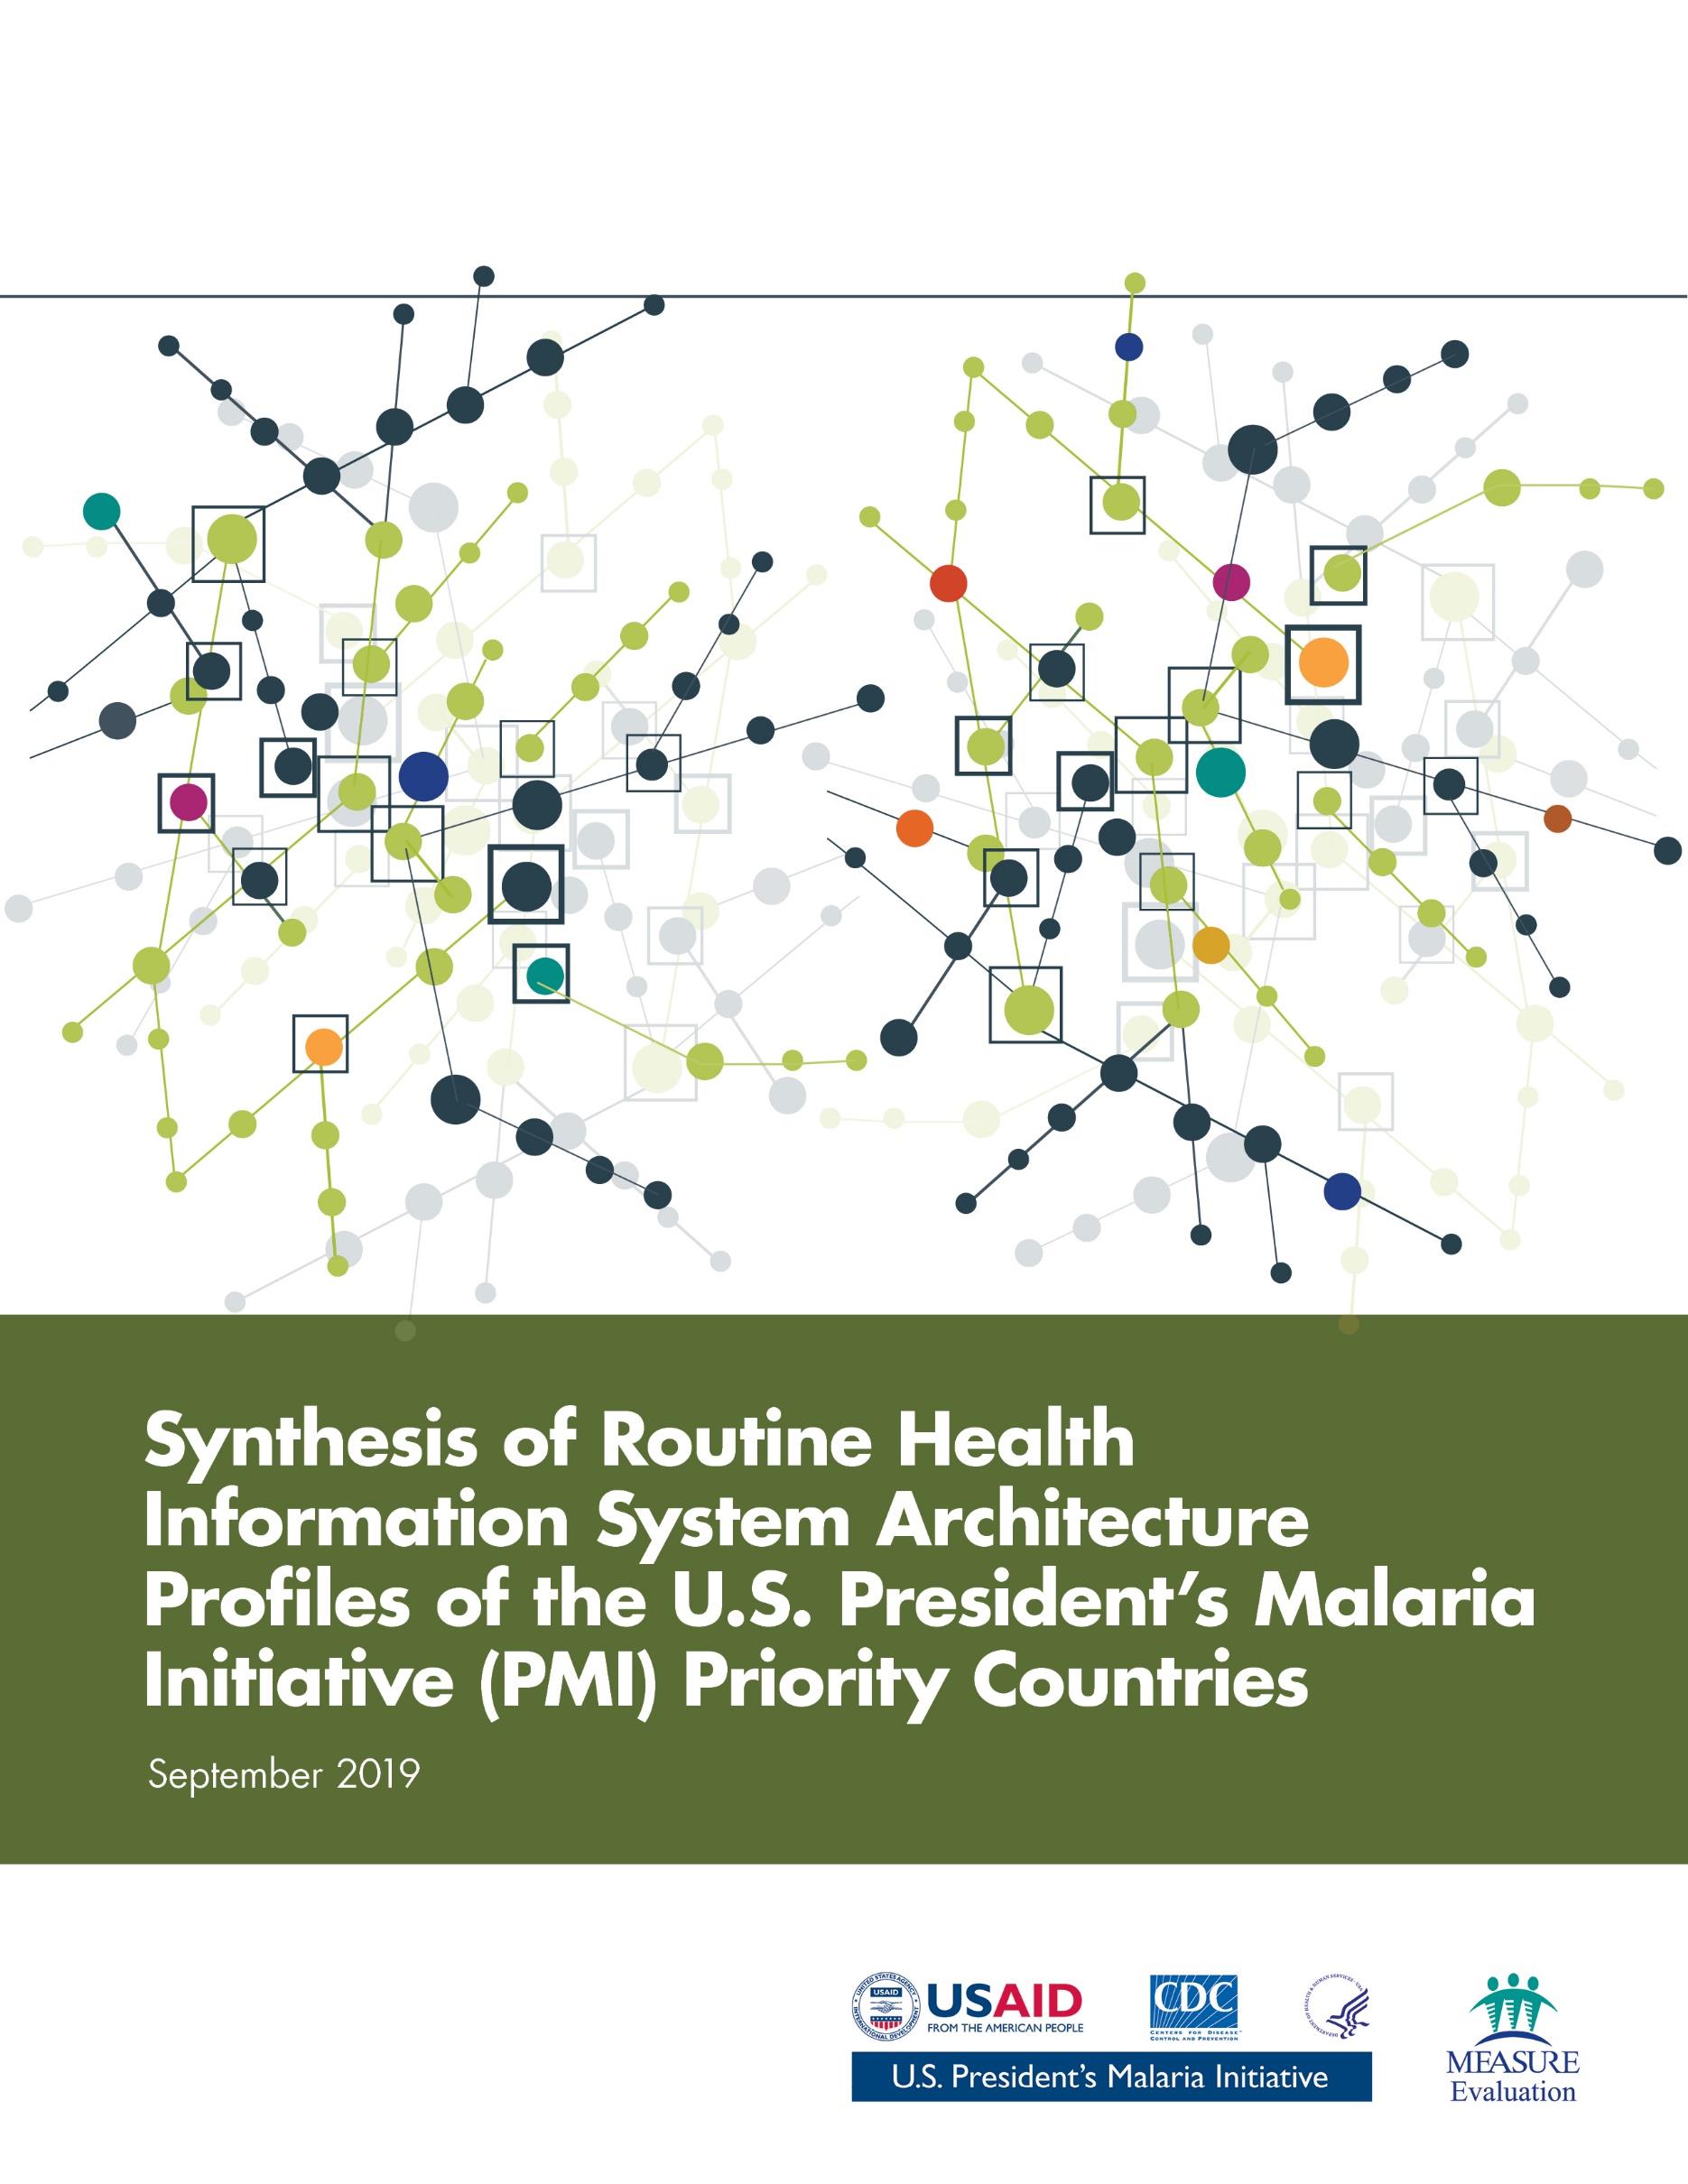 Synthesis of Routine Health Information System Architecture Profiles of the U.S. President's Malaria Initiative (PMI) Priority Countries